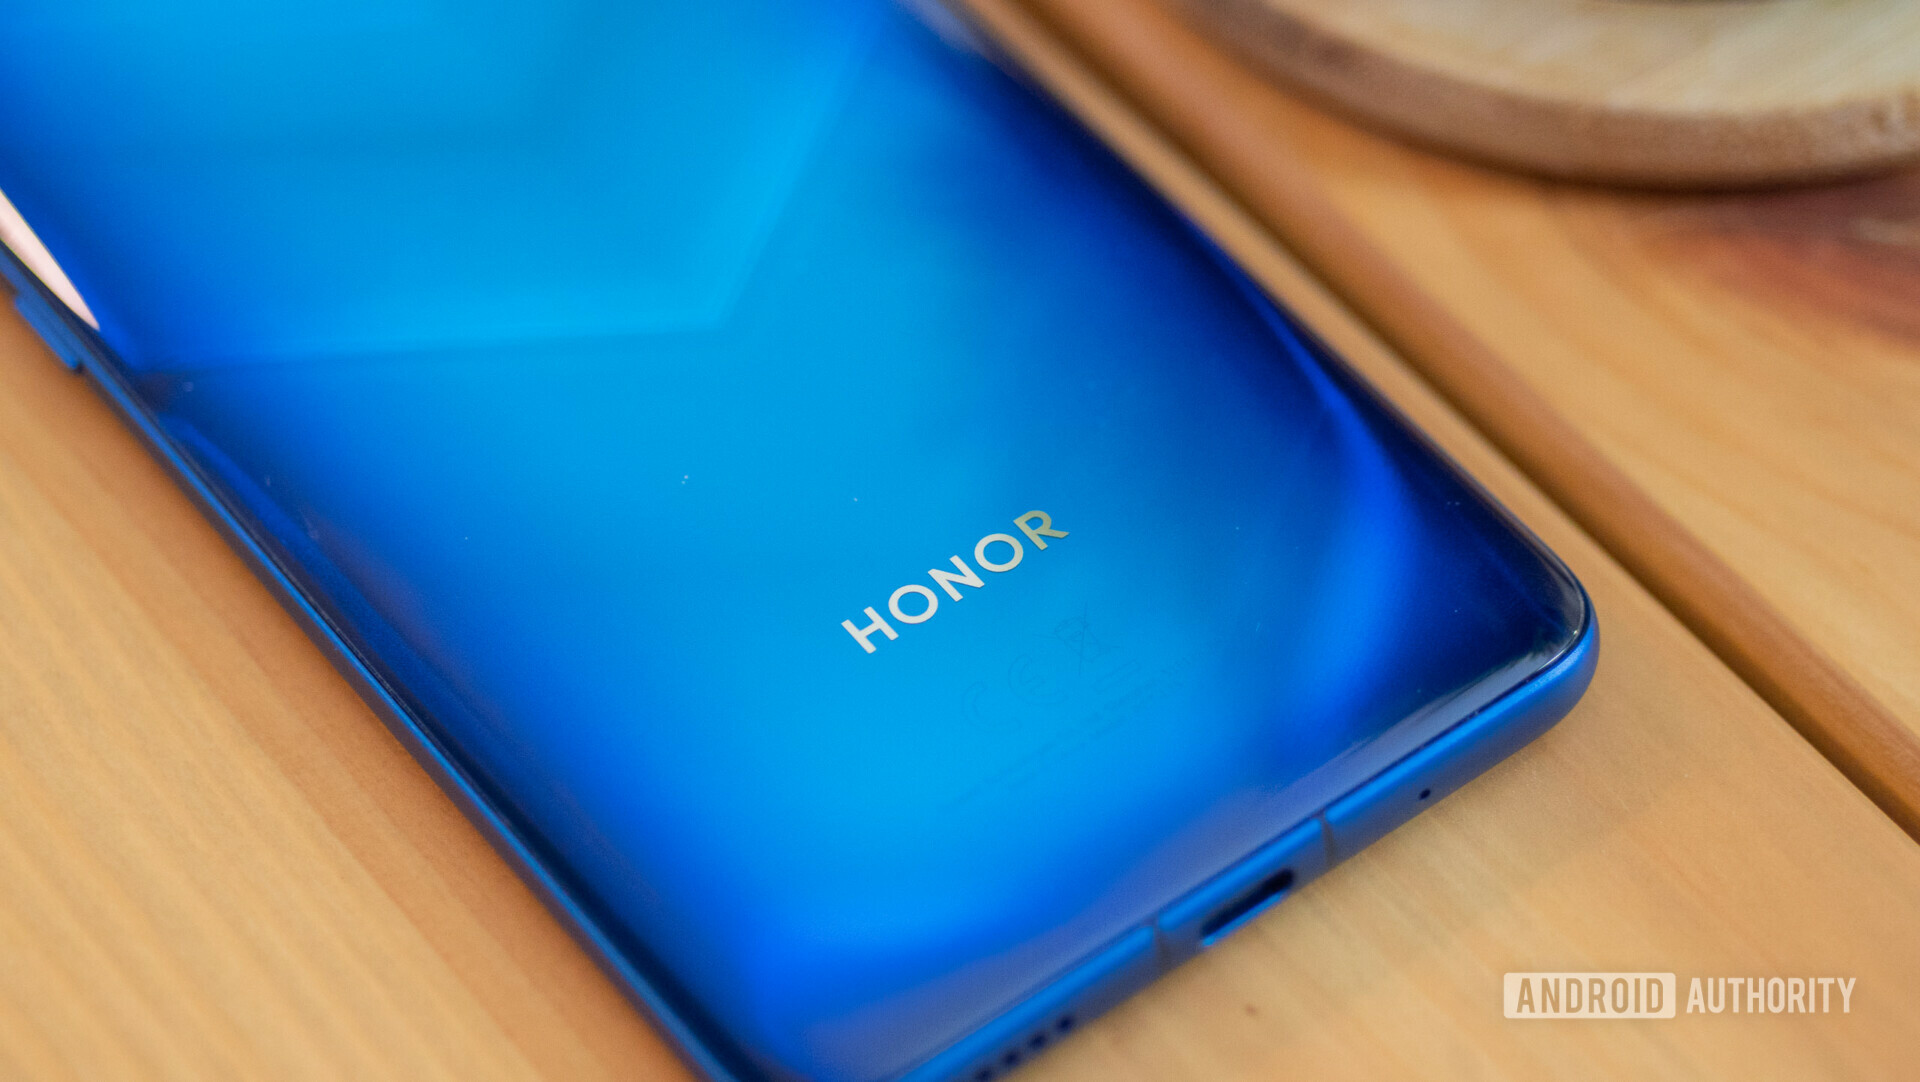 blue version of honor view 20 back with HONOR logo